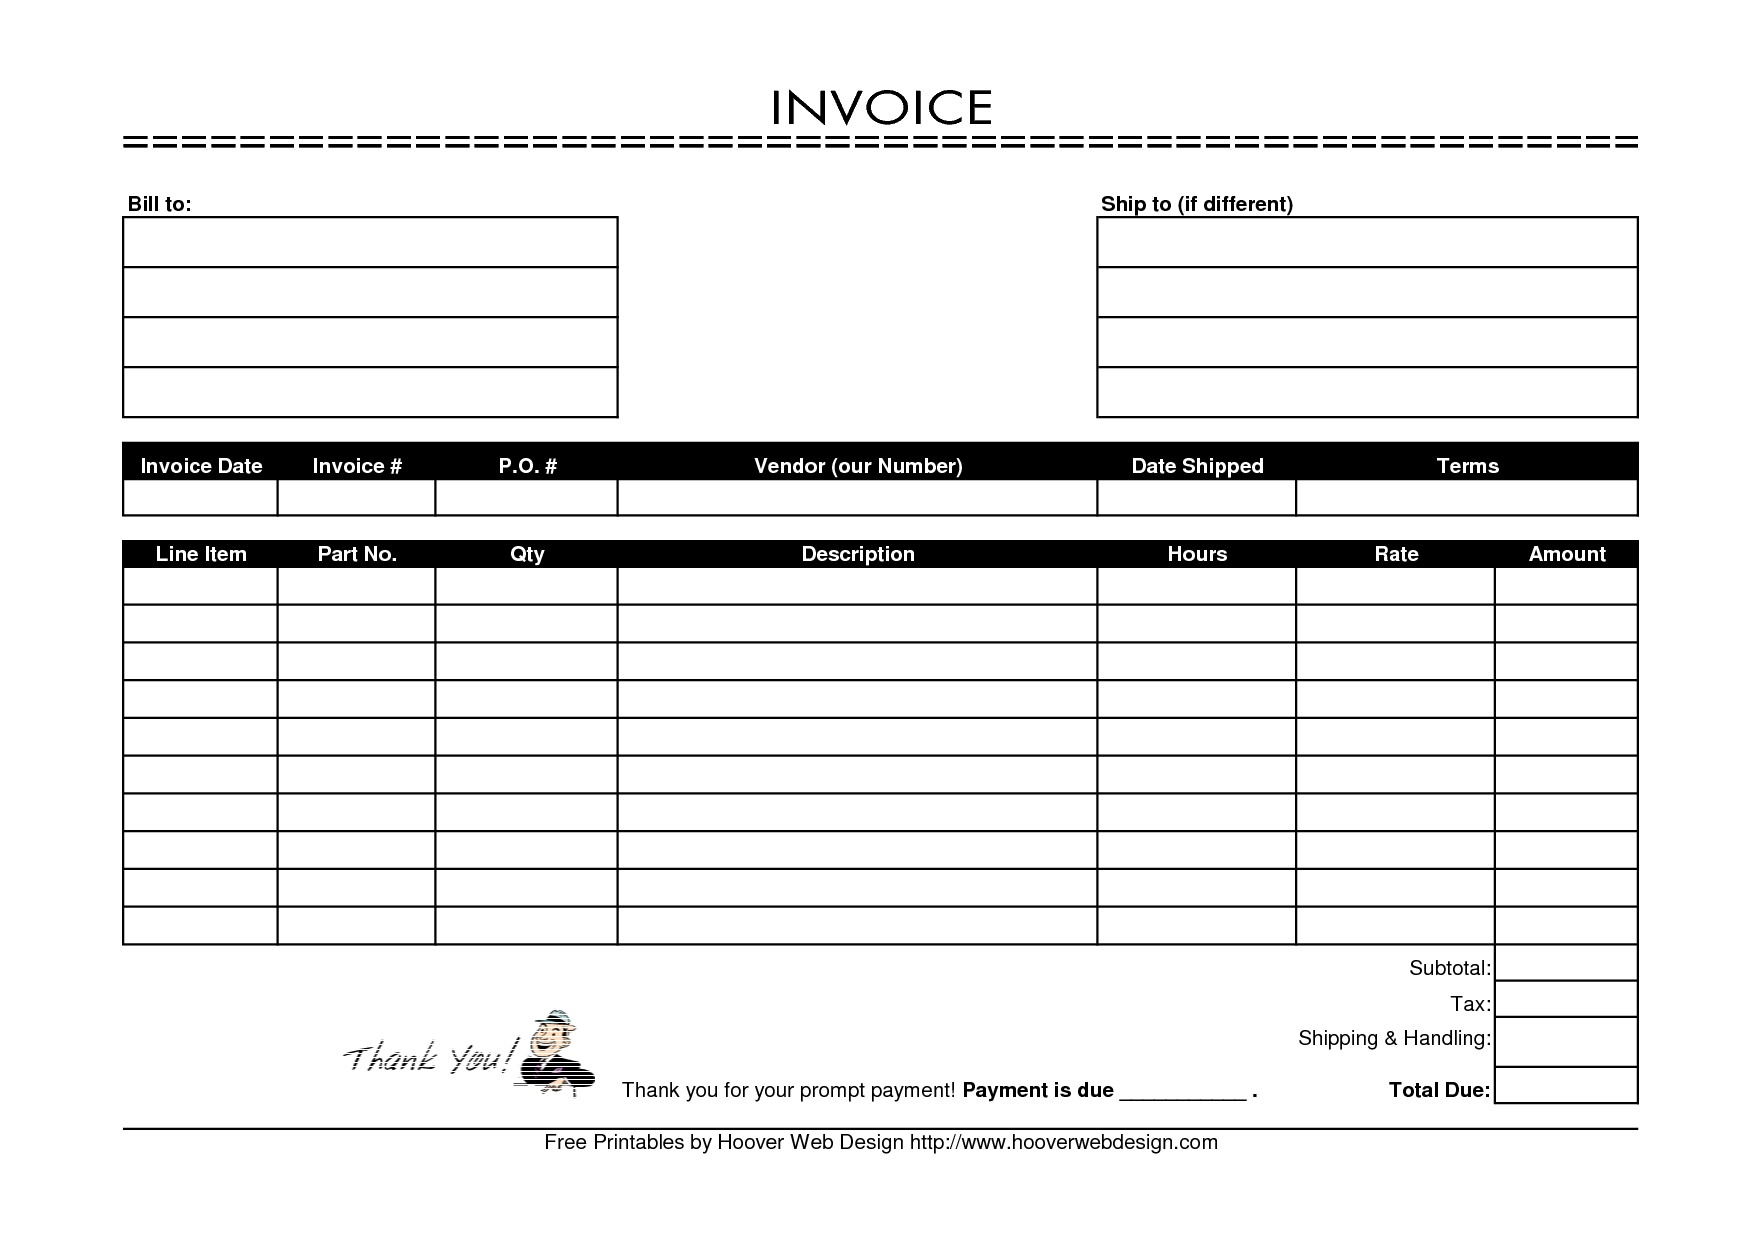 invoice form free microsoft word user manual invoice blank form